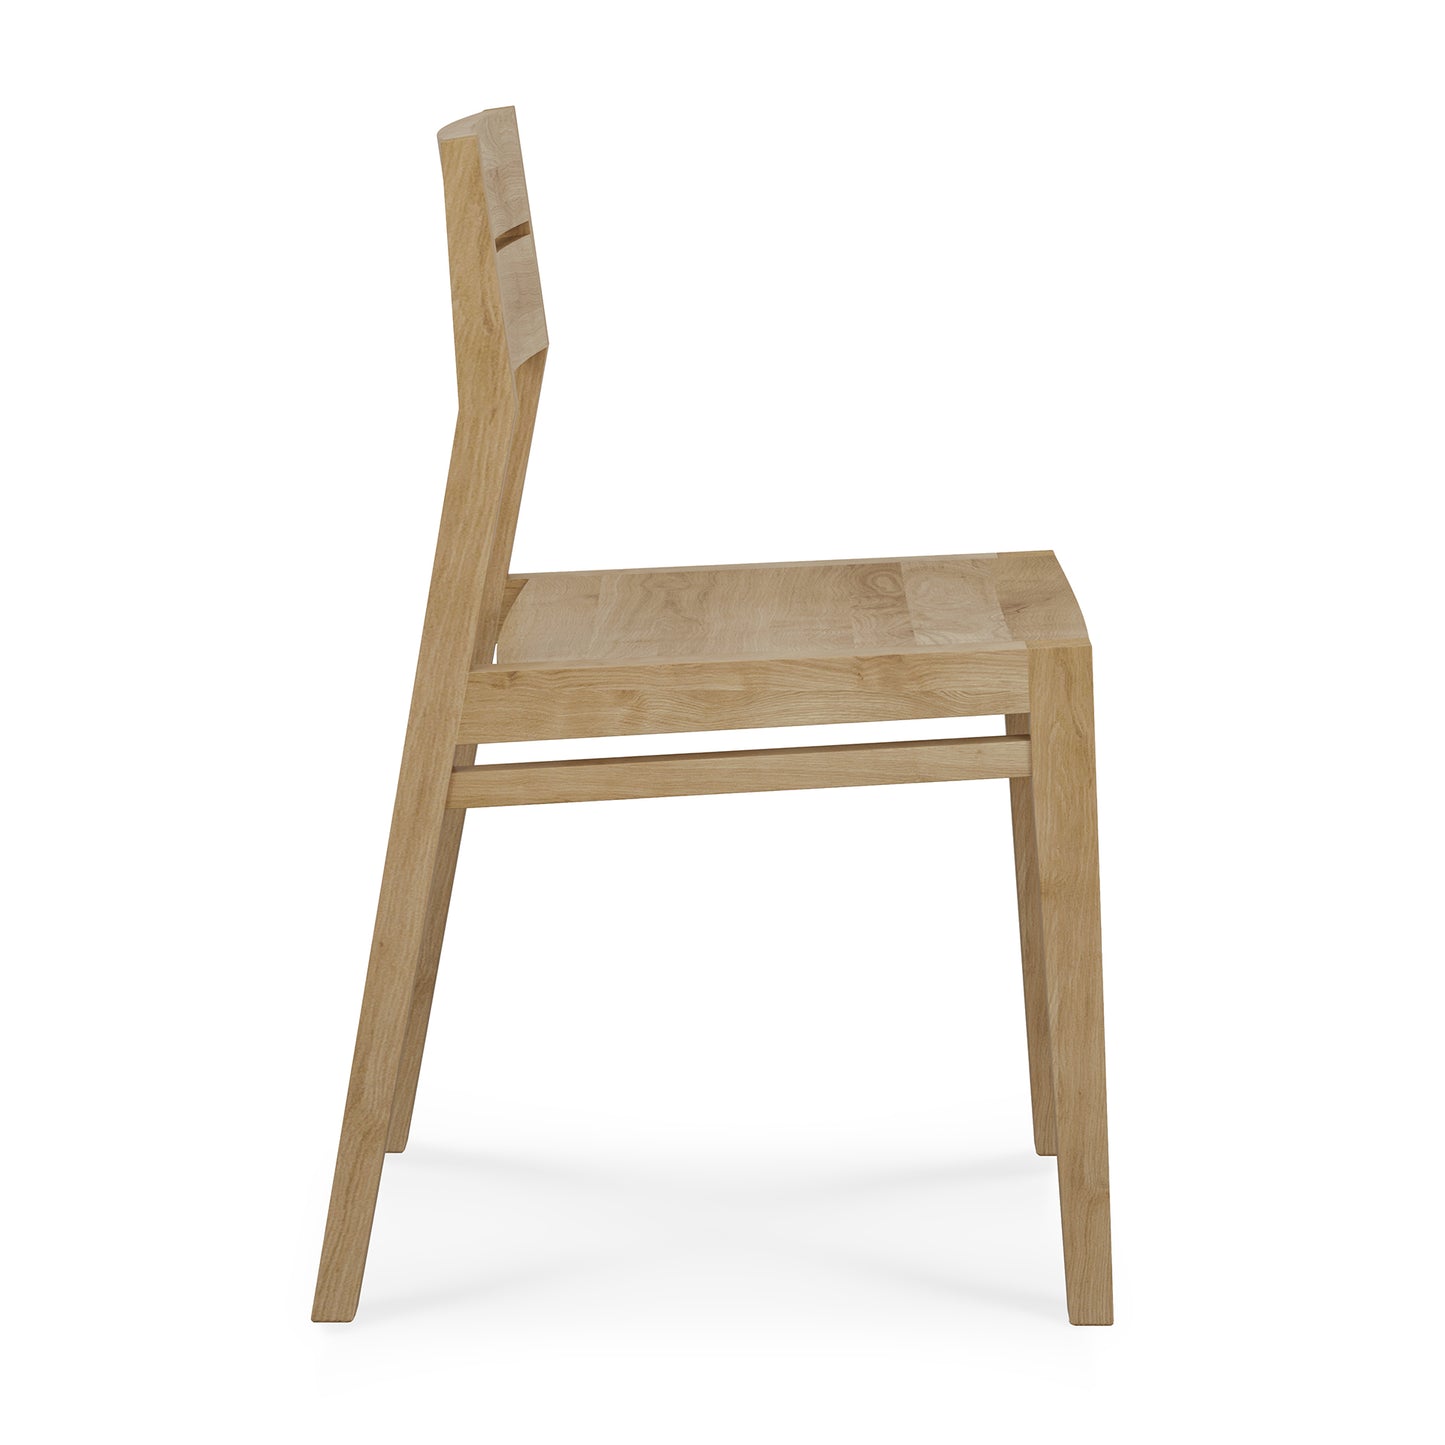 EX1 Dining Chair